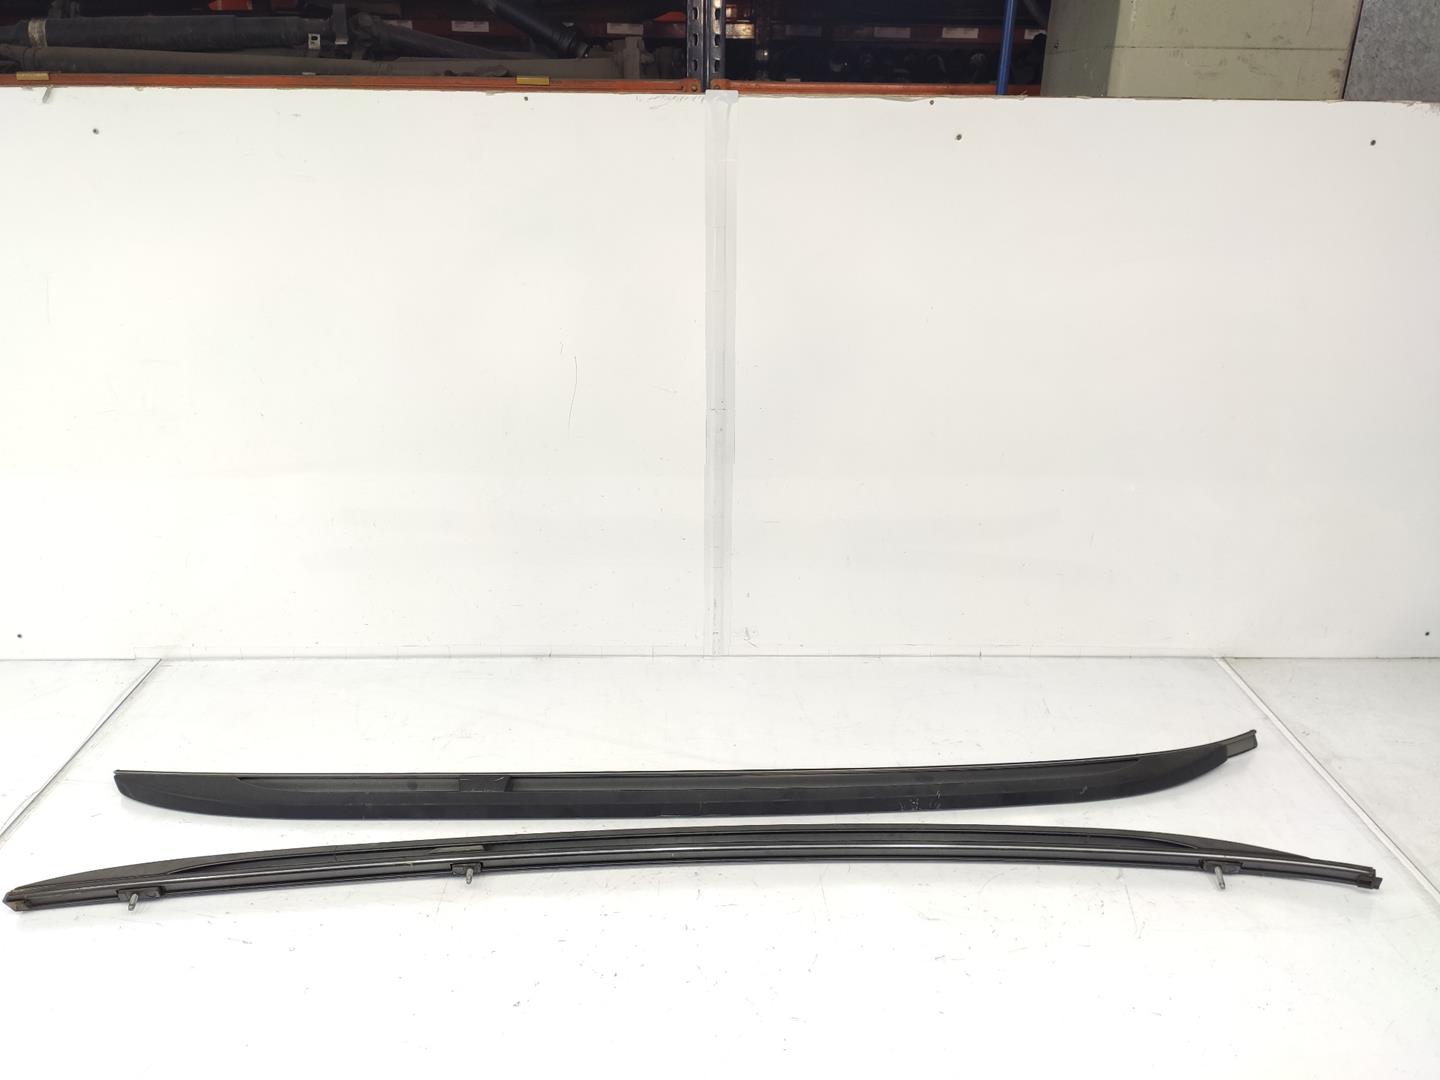 BMW X3 E83 (2003-2010) Right Side Roof Rail 51137052537, 51137052538 19762909